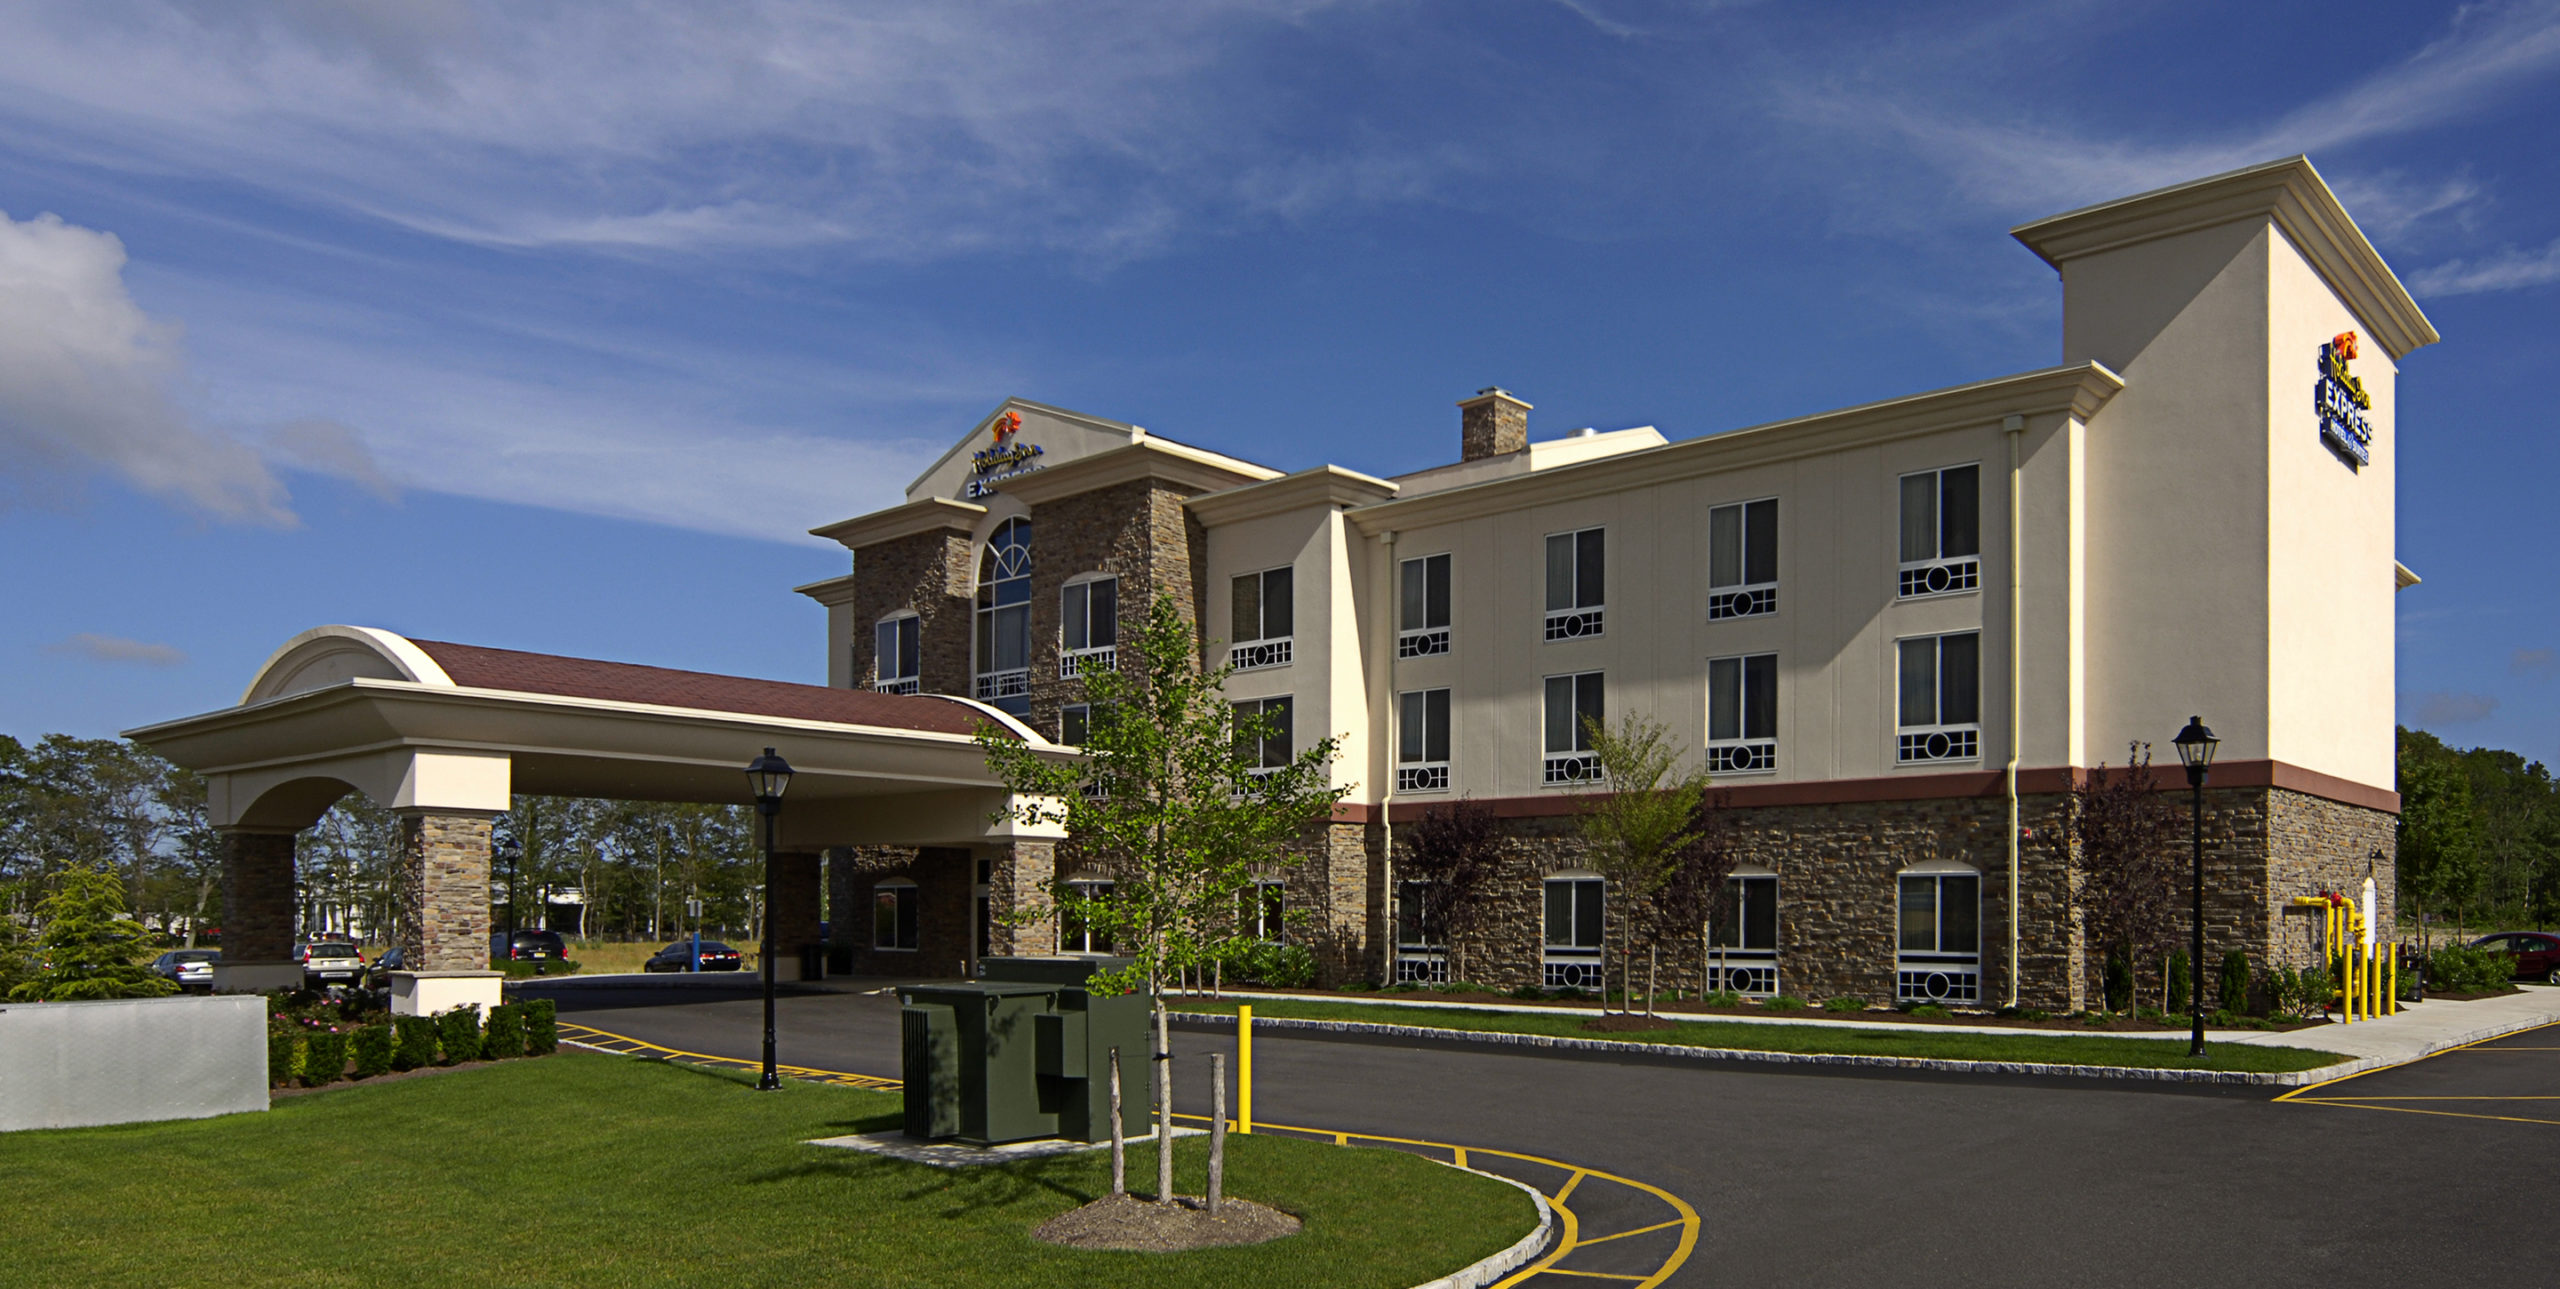 Exerior of Holiday Inn Express at 1707 Old Country Road, Riverhead